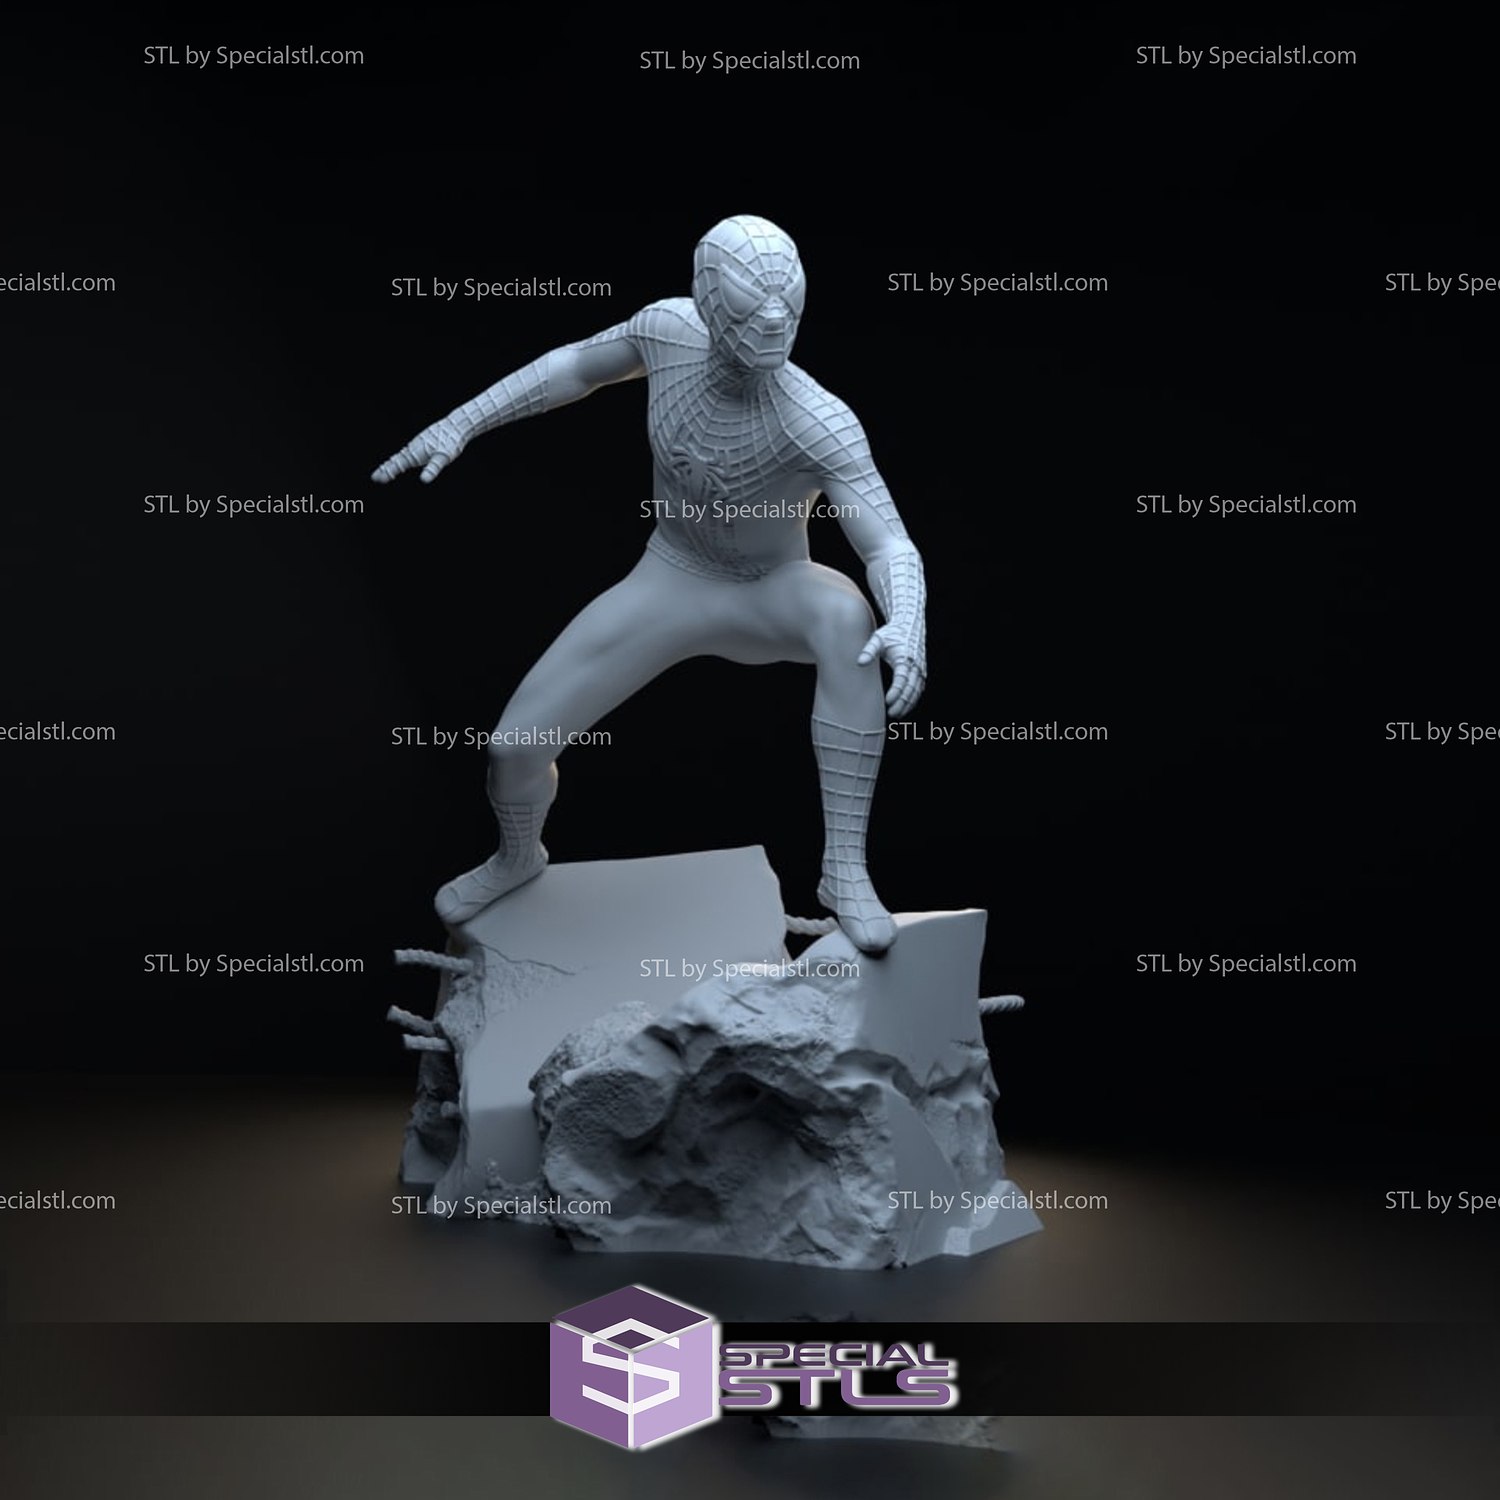 Spiderman Tobey Maguire for Diorama 3D Printing Model STL Files